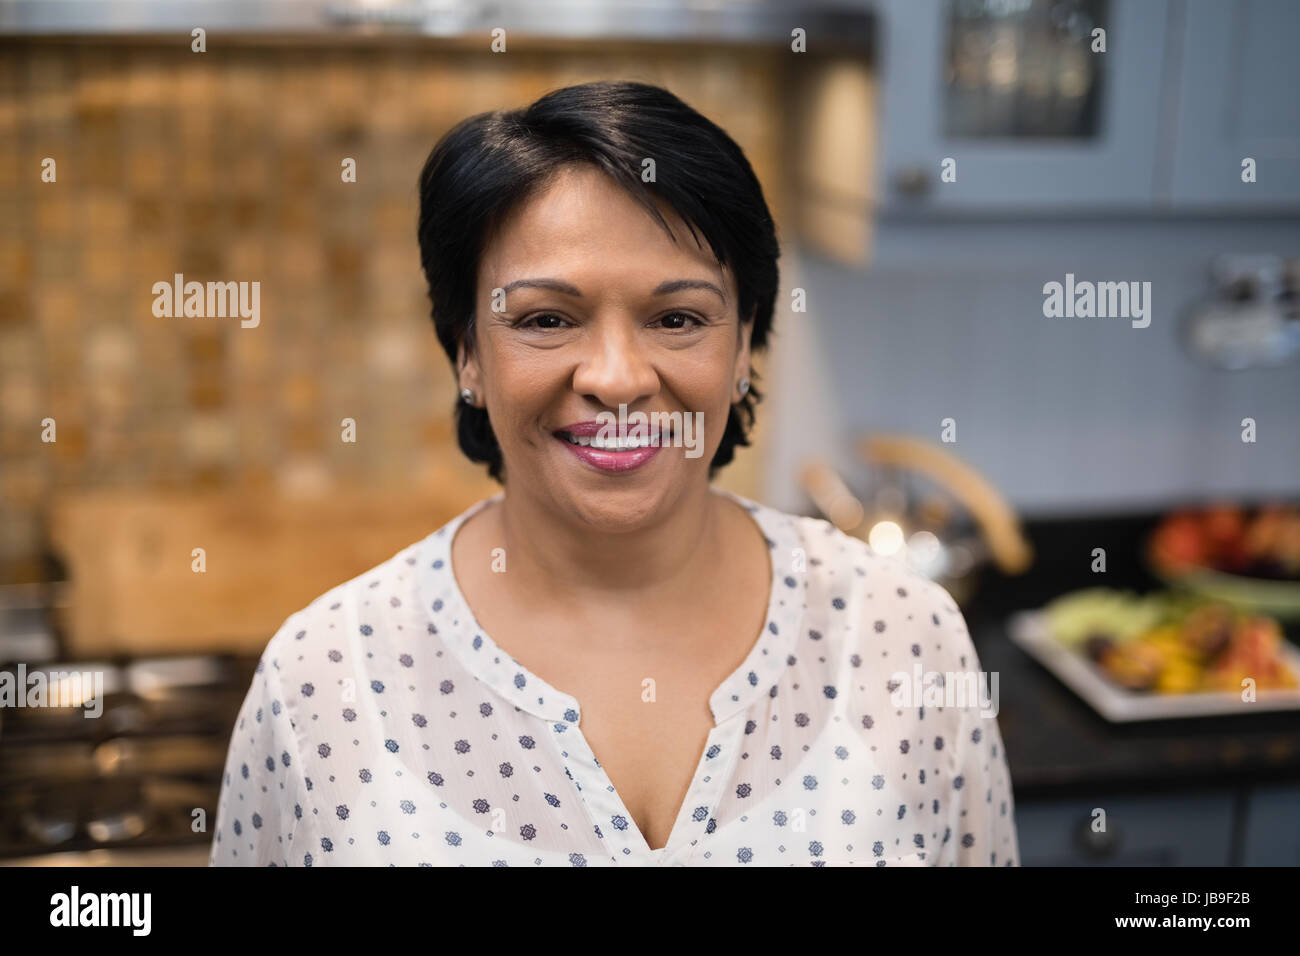 Portrait of smiling mature woman standing in kitchen at home Stock Photo